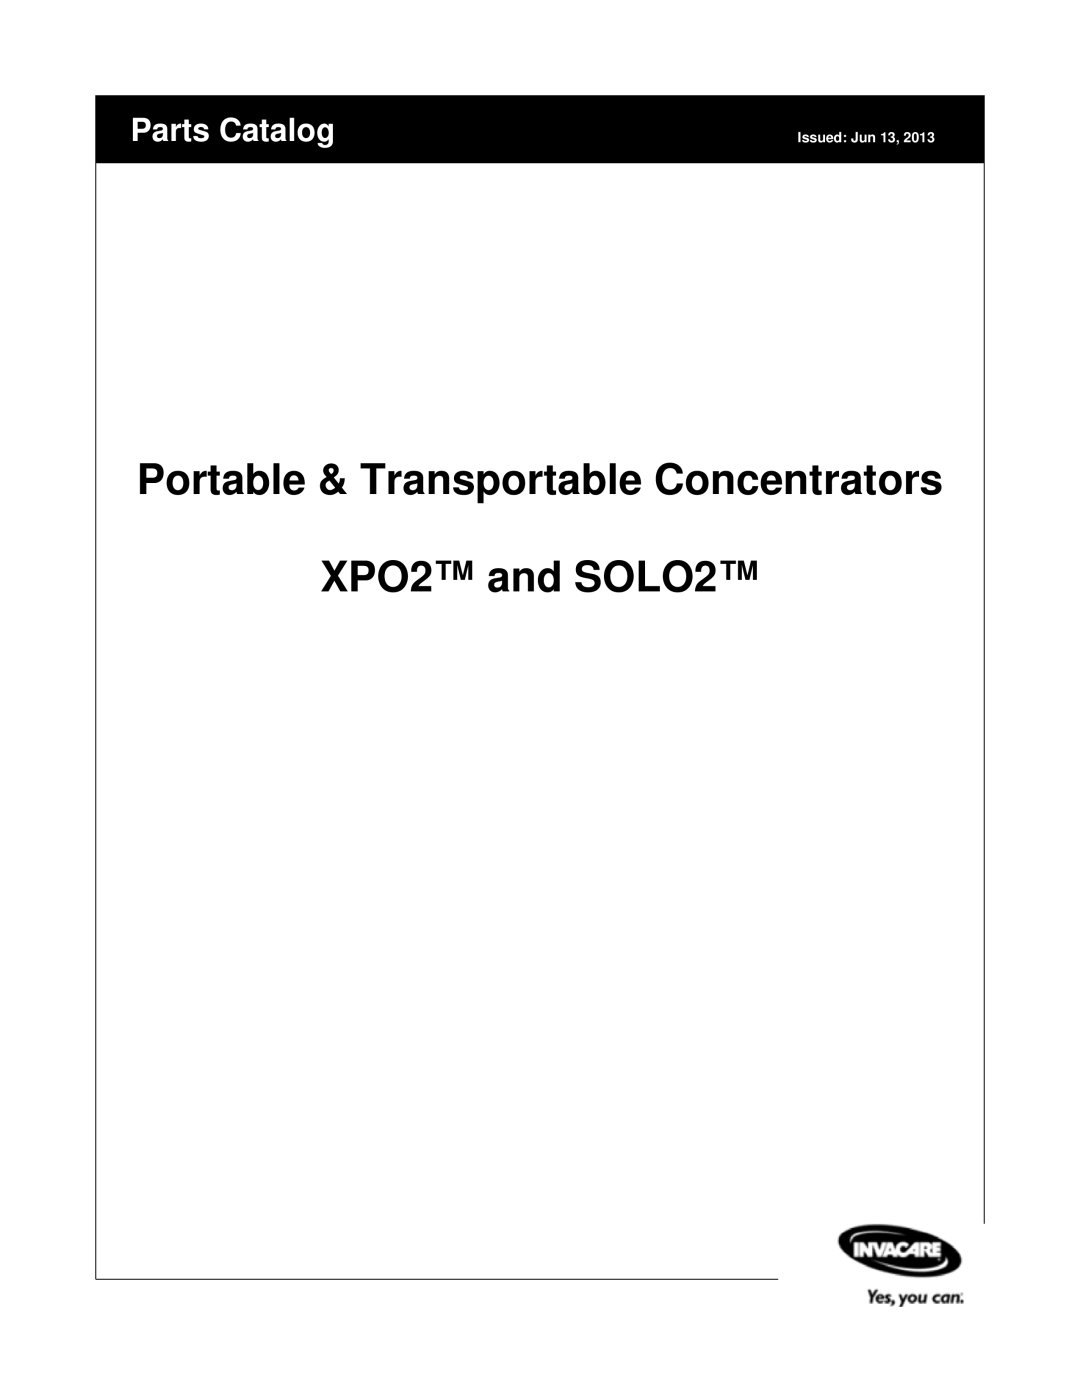 Invacare manual Portable & Transportable Concentrators XPO2 and SOLO2, Parts Catalog, Issued Jun 13 